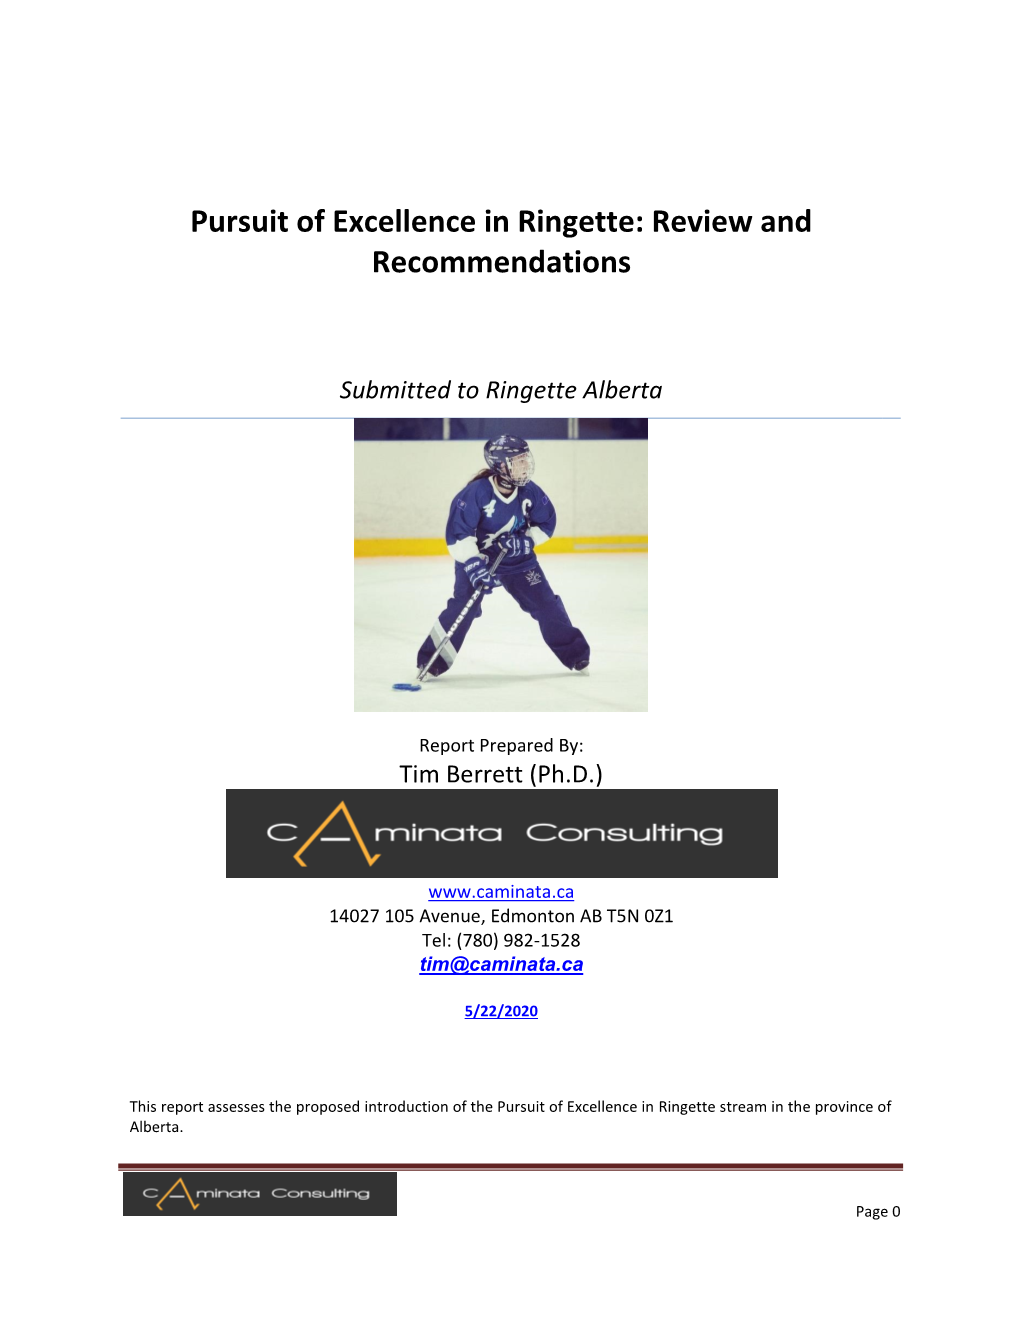 Pursuit of Excellence in Ringette: Review and Recommendations